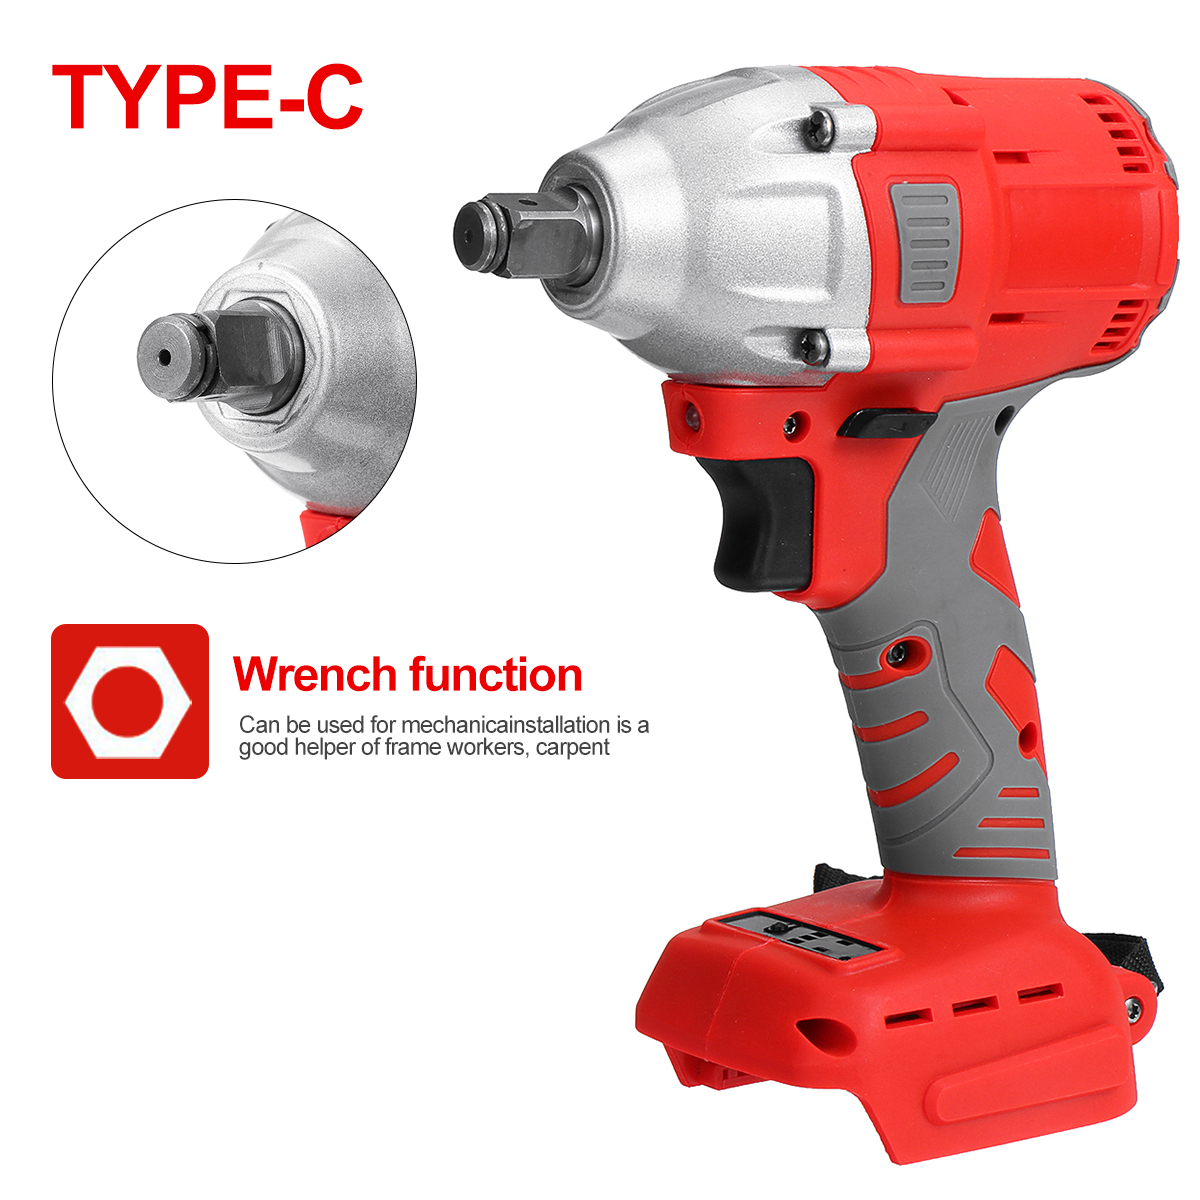 800NM-Brushless-Torque-Wrench-Electric-Screwdriver-Wrench-Cordless-Rechargable-Screw-Driver-Wrench-P-1843516-7